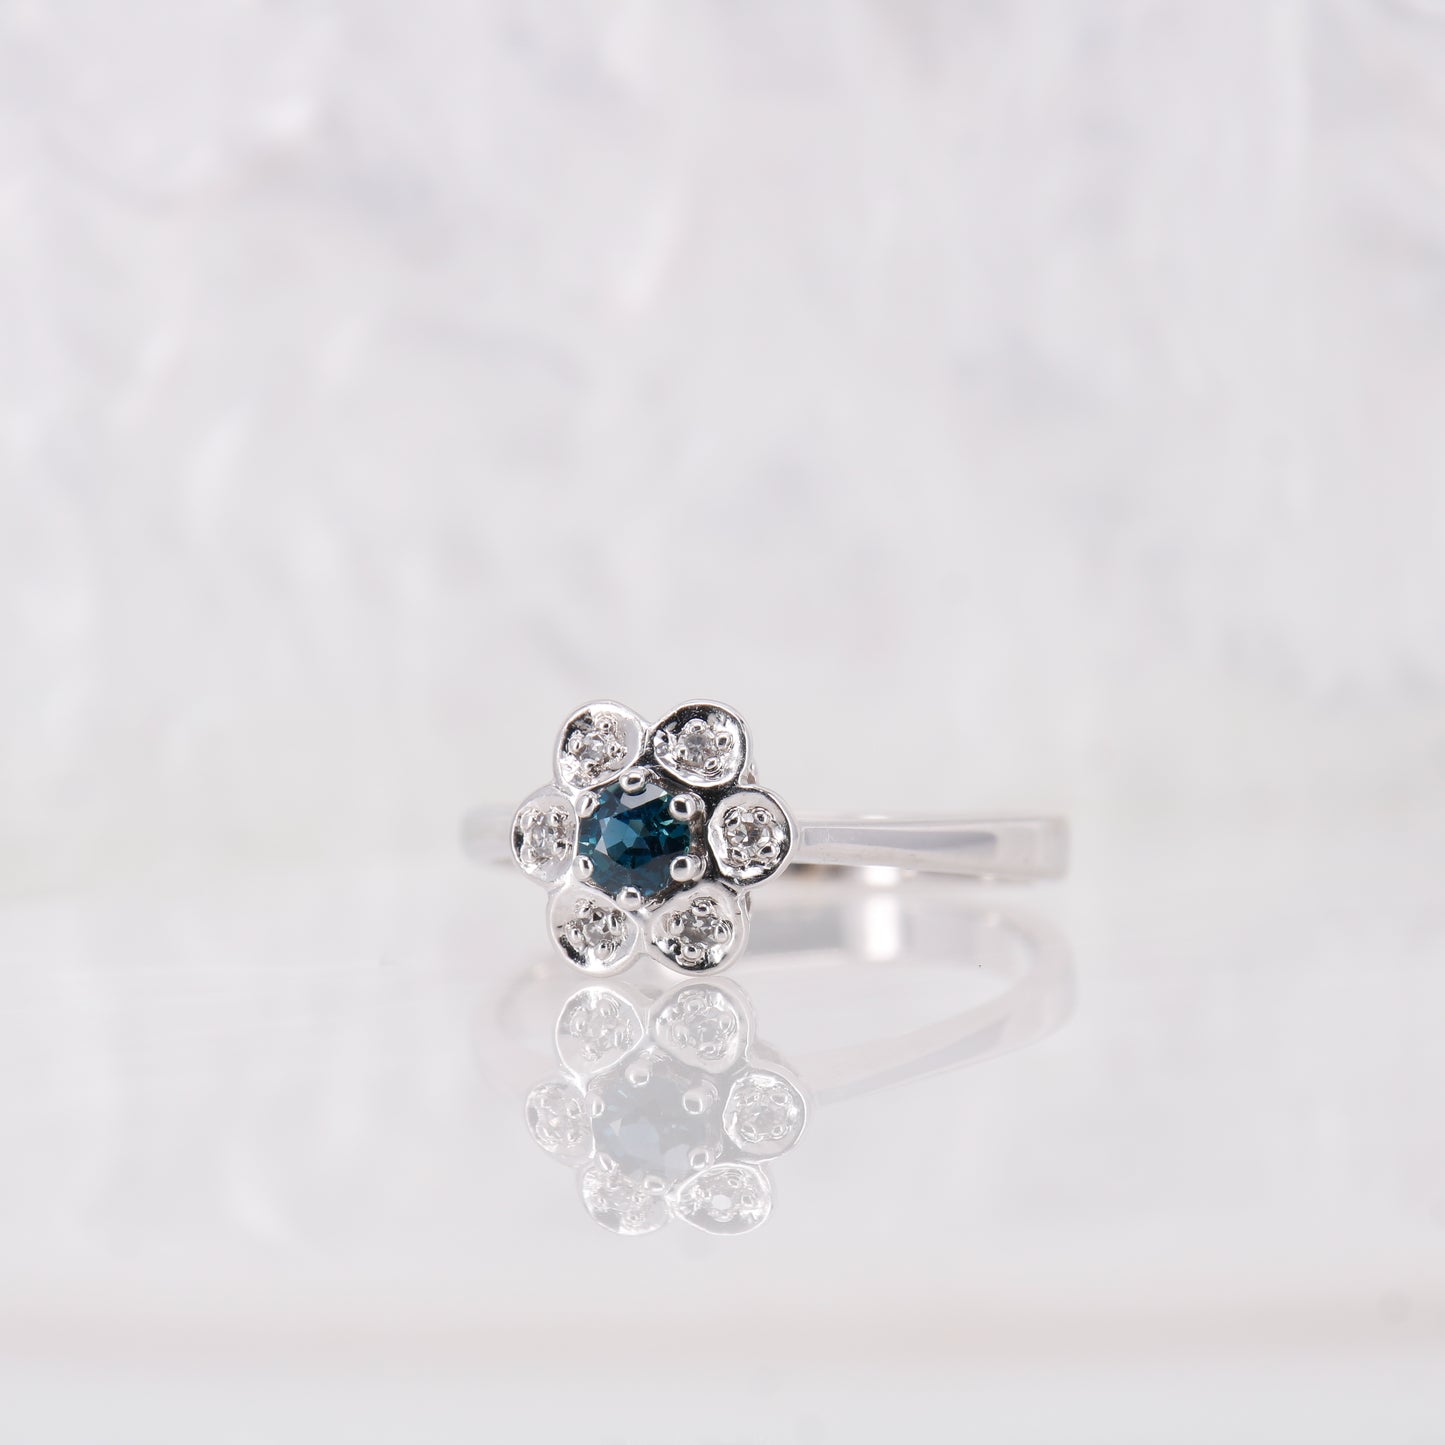 Antique 18ct White Gold Sapphire & Diamond Gold Ring, Vintage Flower Sapphire and Diamond Engagement Ring.